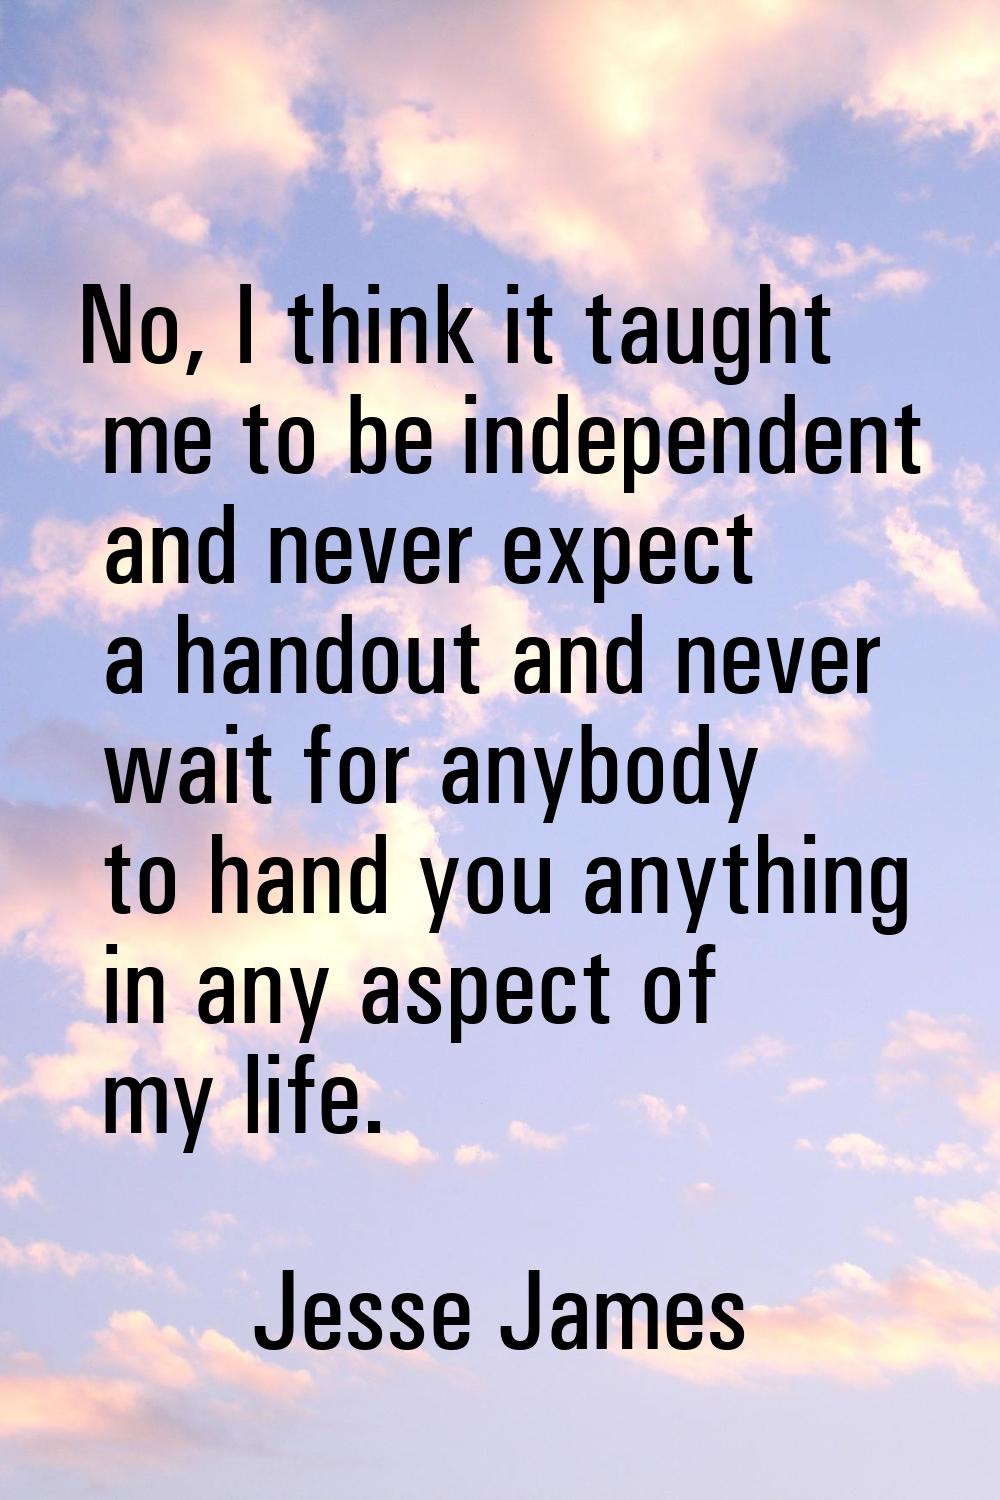 No, I think it taught me to be independent and never expect a handout and never wait for anybody to